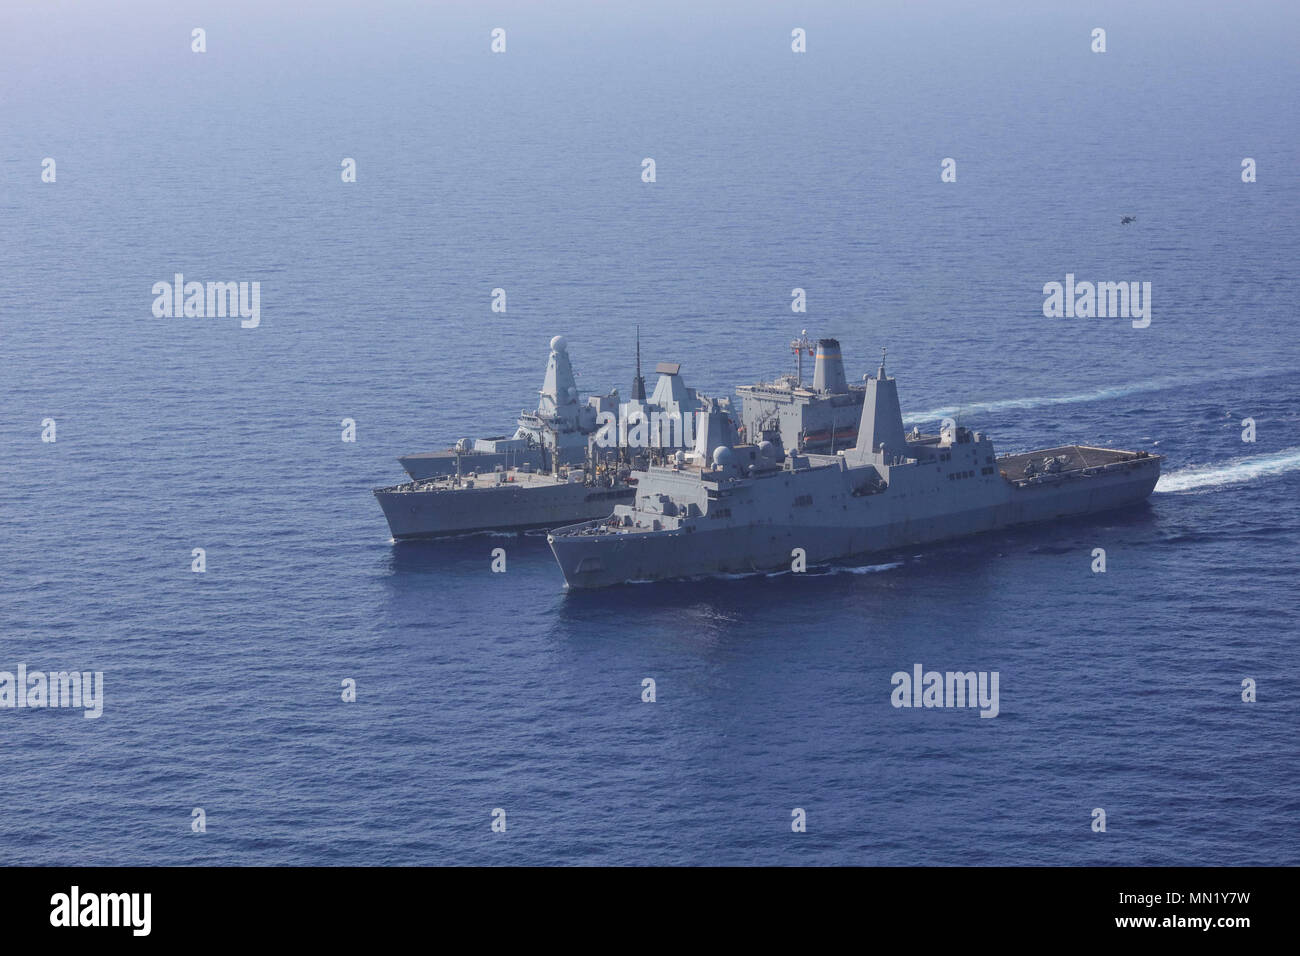 170811-N-FM530-145  MEDITERRANEAN SEA (Aug. 11, 2017) The British destroyer HMS Duncan (D37), left, the fleet replenishment oiler USNS Patuxent (T-AO 201), middle, and the San Antonio-class amphibious transport dock ship USS Mesa Verde (LPD 19) sail in formation during a replenishment-at-sea Aug. 11, 2017. Mesa Verde is deployed with the Bataan Amphibious Ready Group and 24th Marine Expeditionary Unit to support maritime security operations and theater security cooperation efforts in the U.S. 6th Fleet and U.S. 5th Fleet areas of operations. (U.S. Navy photo by Mass Communication Specialist 2n Stock Photo